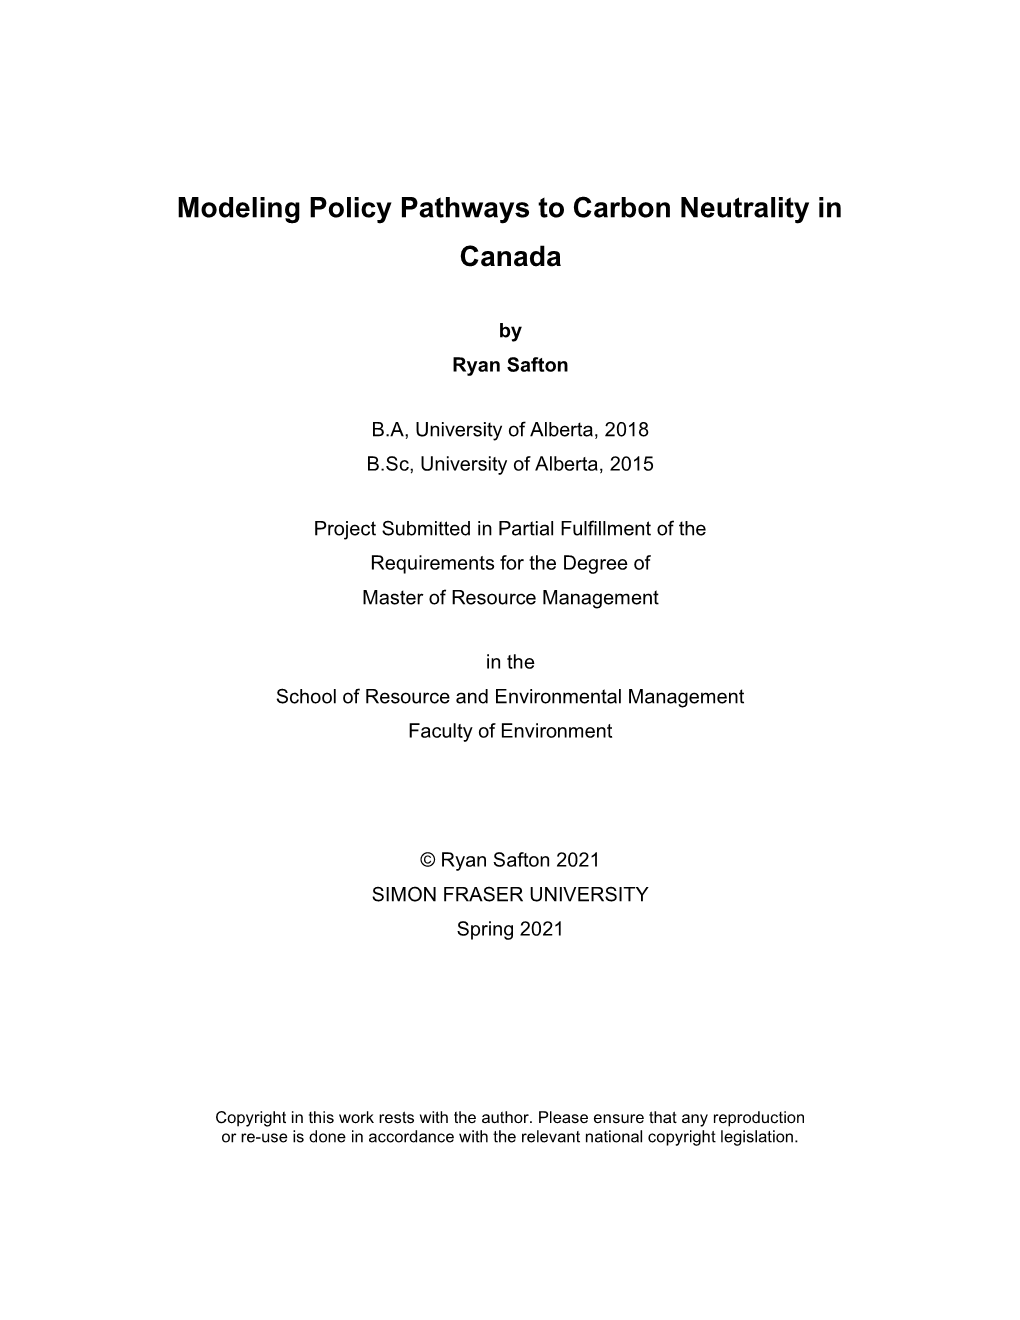 Modeling Policy Pathways to Carbon Neutrality in Canada